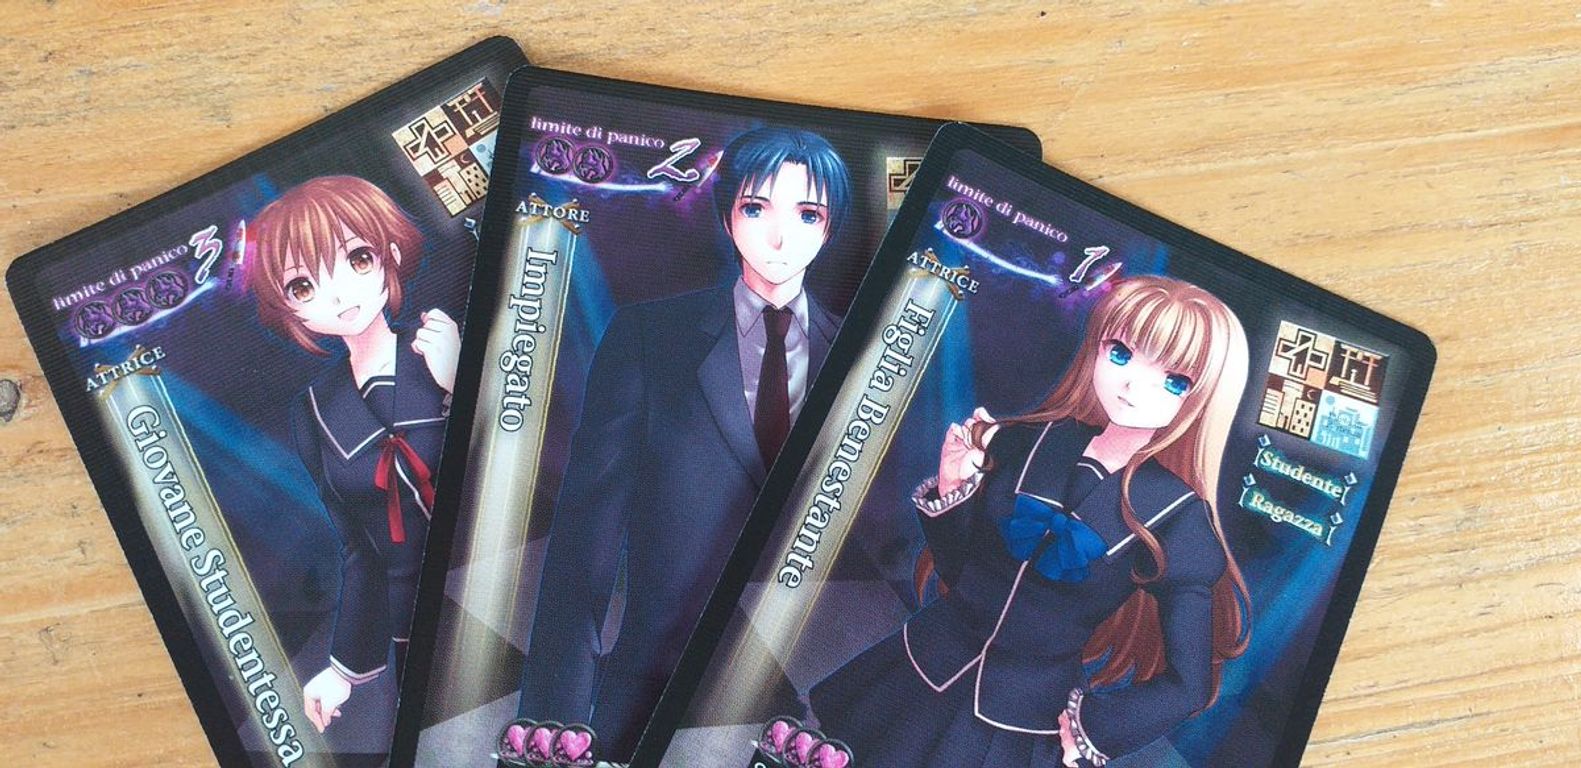 Tragedy Looper cards